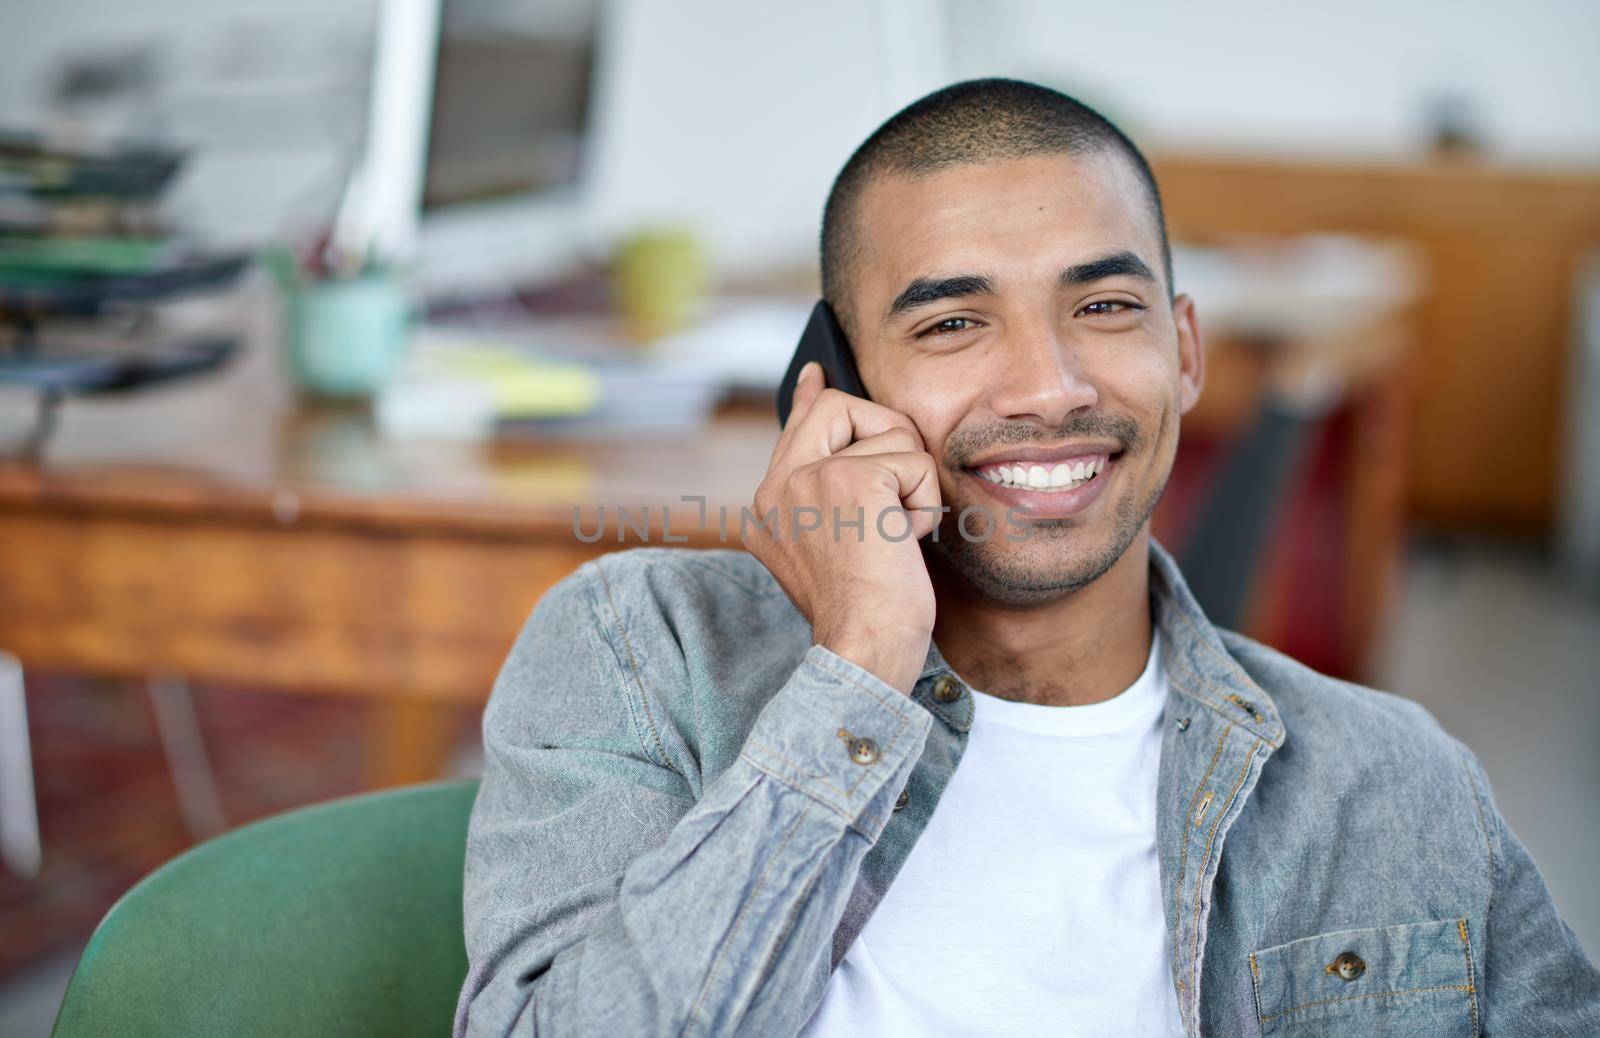 Communication gets the job done. Portrait of a handsome young office worker talking on a cellphone while sitting in an office